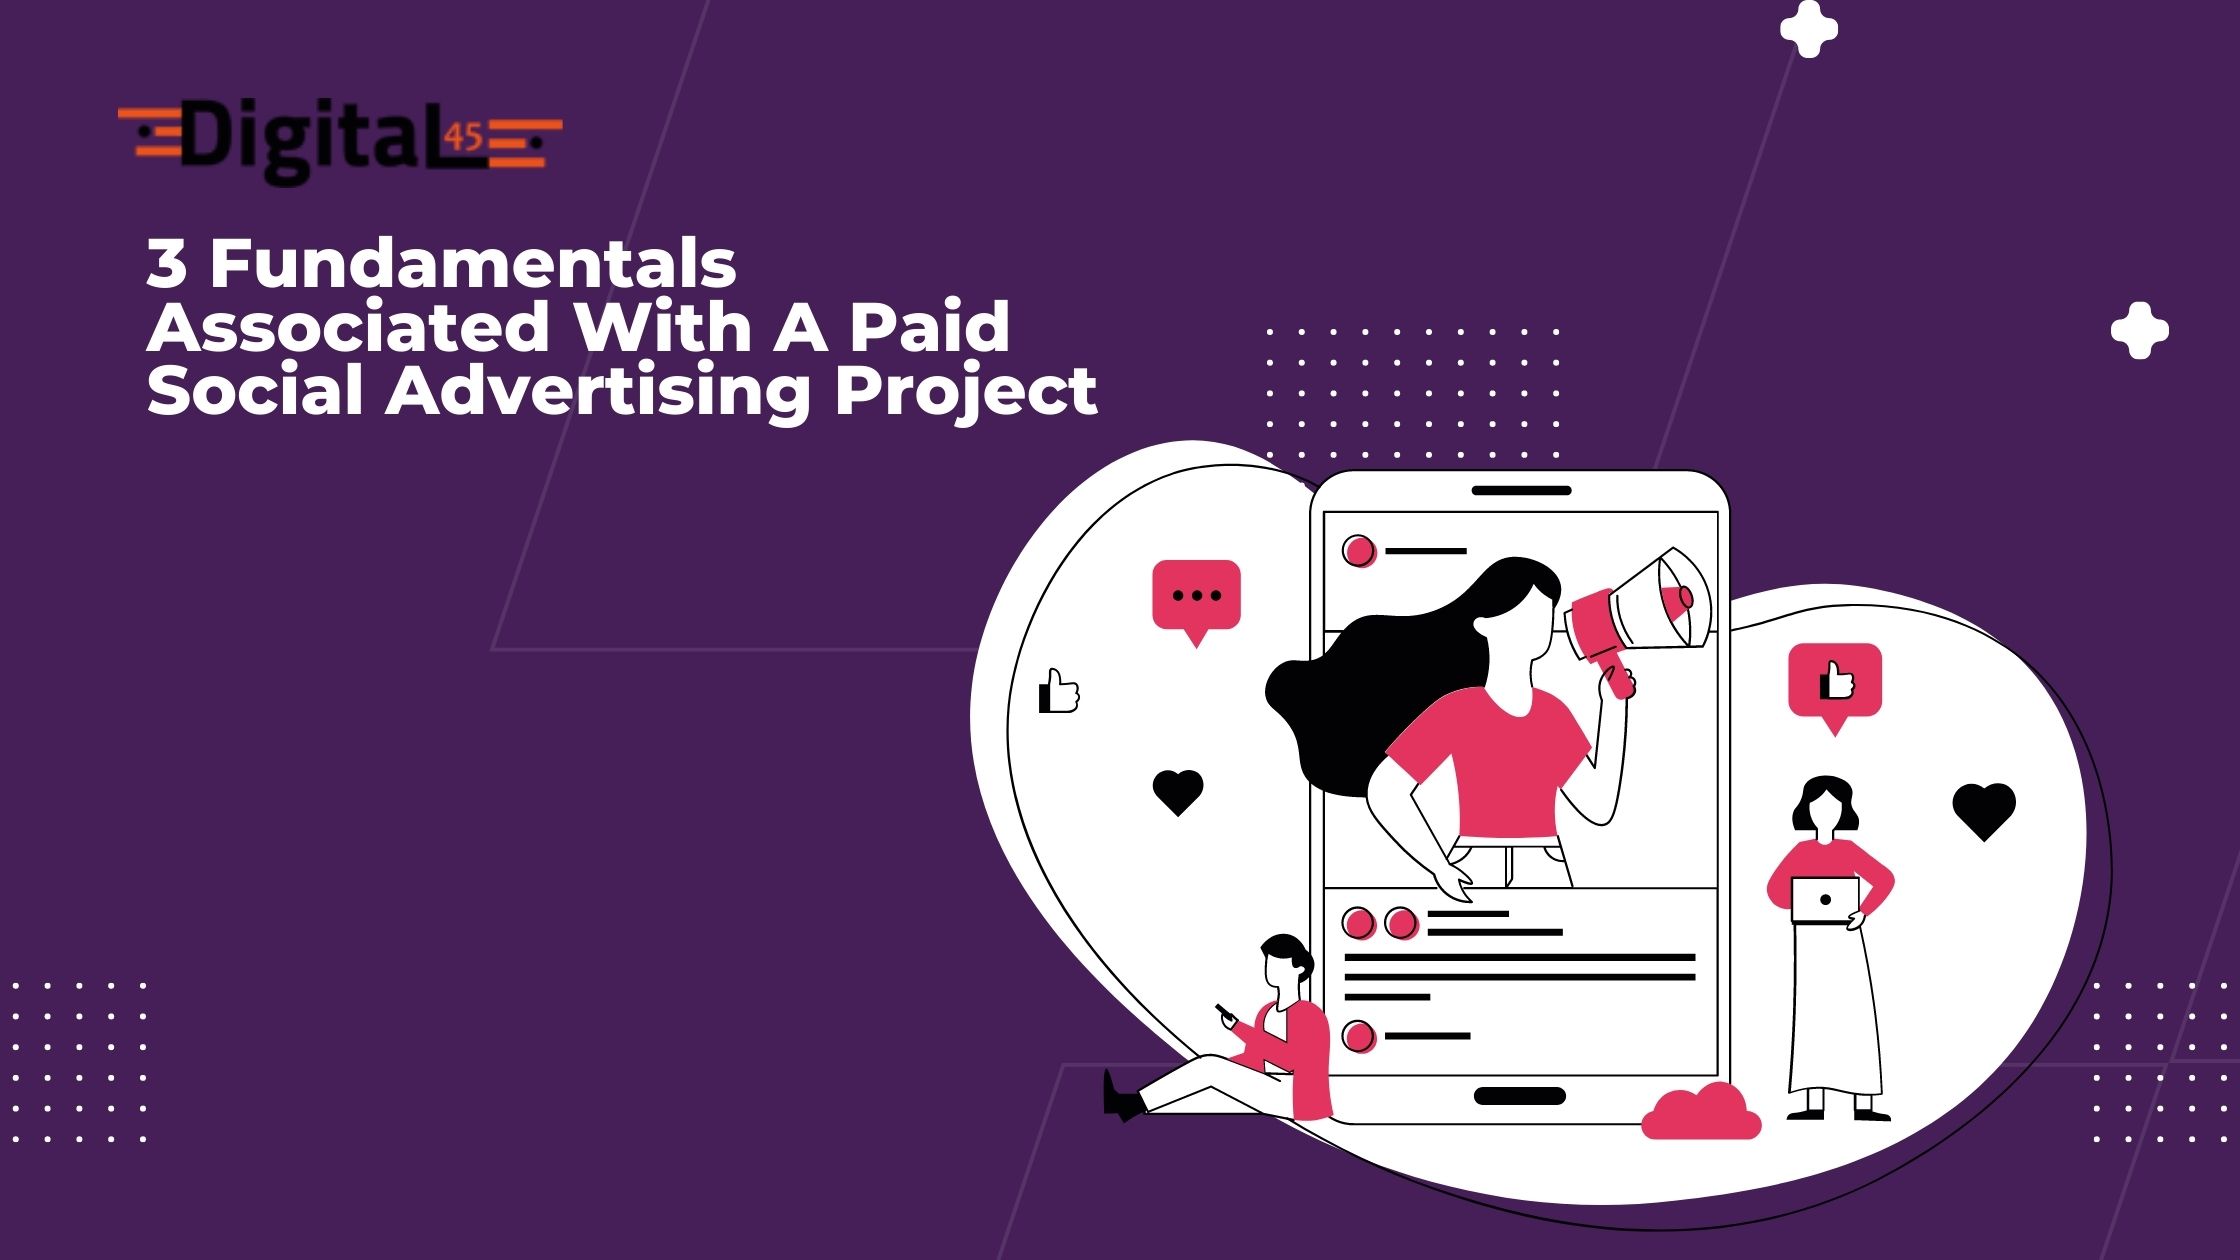 3 Fundamentals Associated With A Paid Social Advertising Project